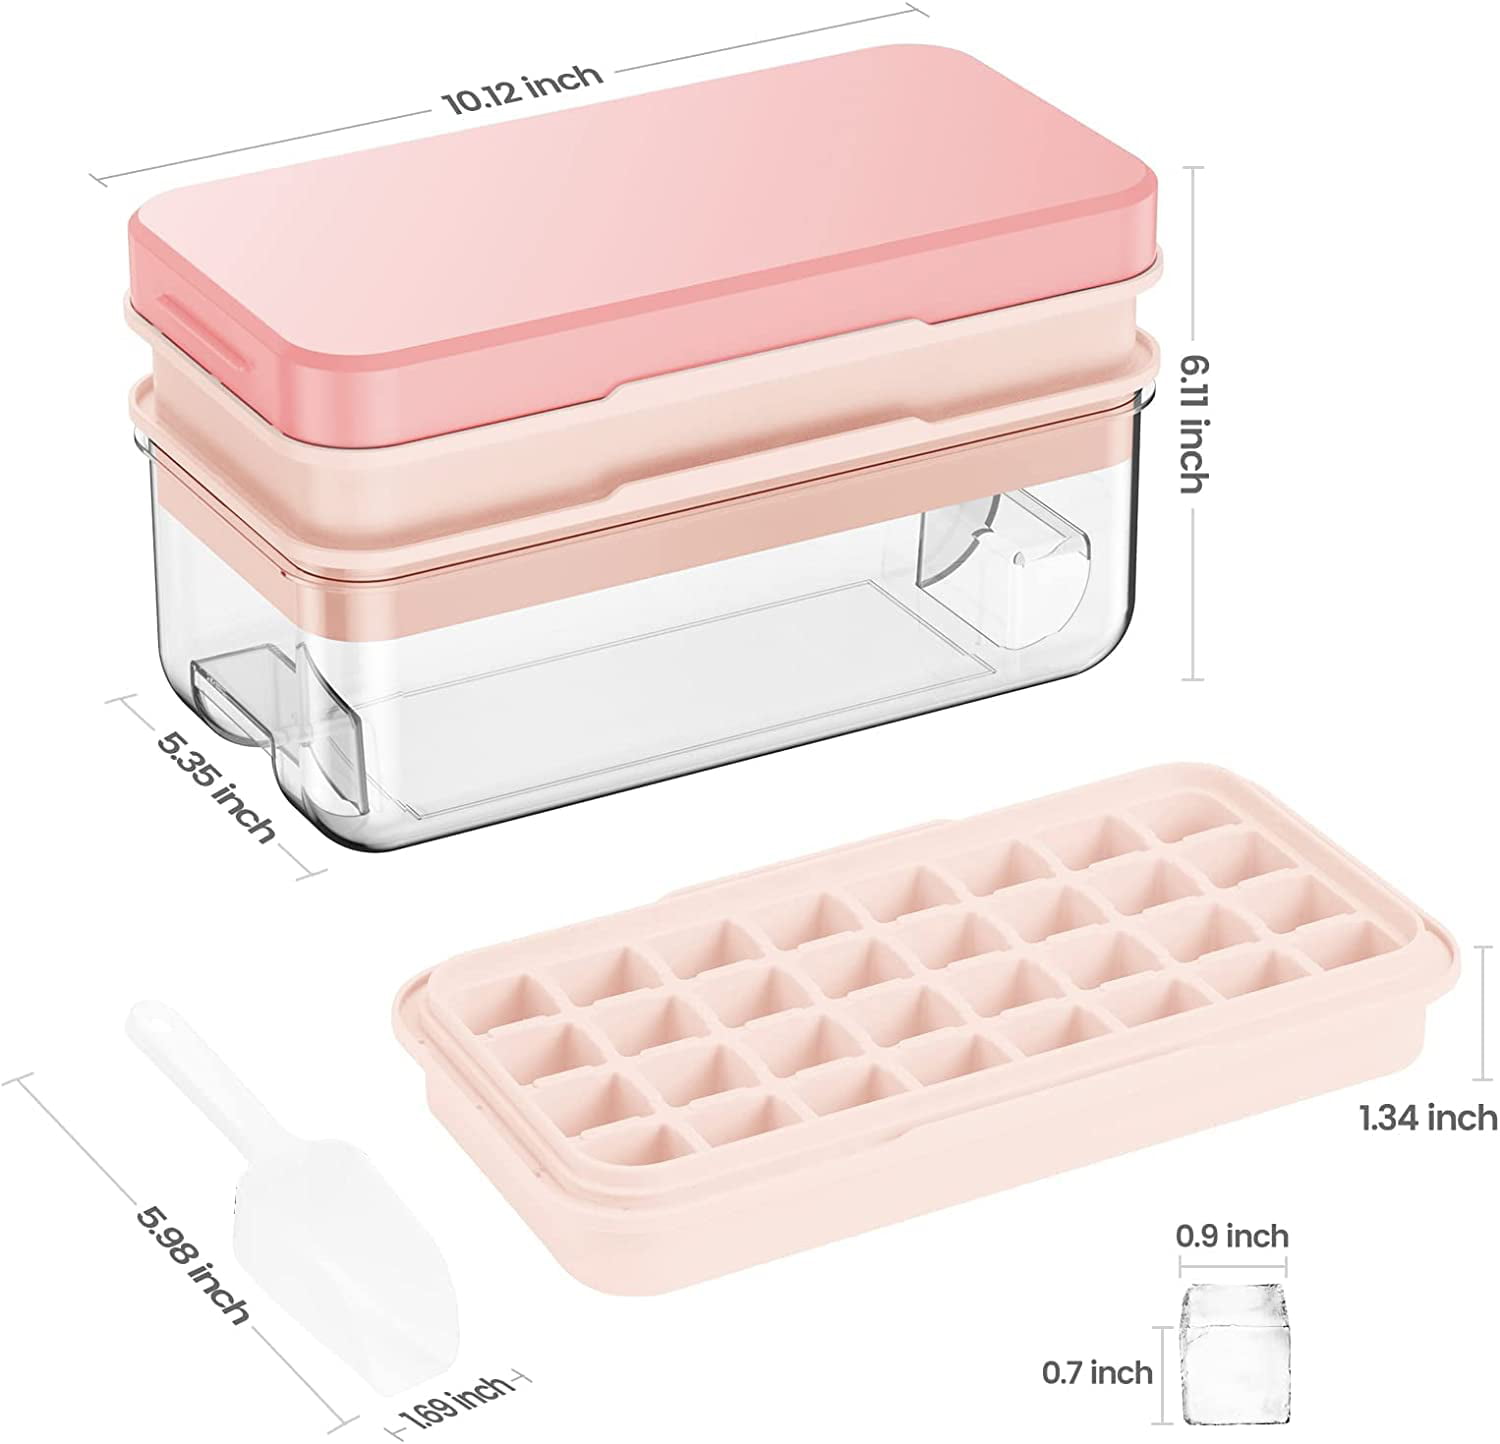 AdWon Ice Tray with Bin Easy Release Ice Cube Tray Container Set with Lid Creative Plastic Storage Box Portable Ice Scoop BPA Free Whiskey Cocktail